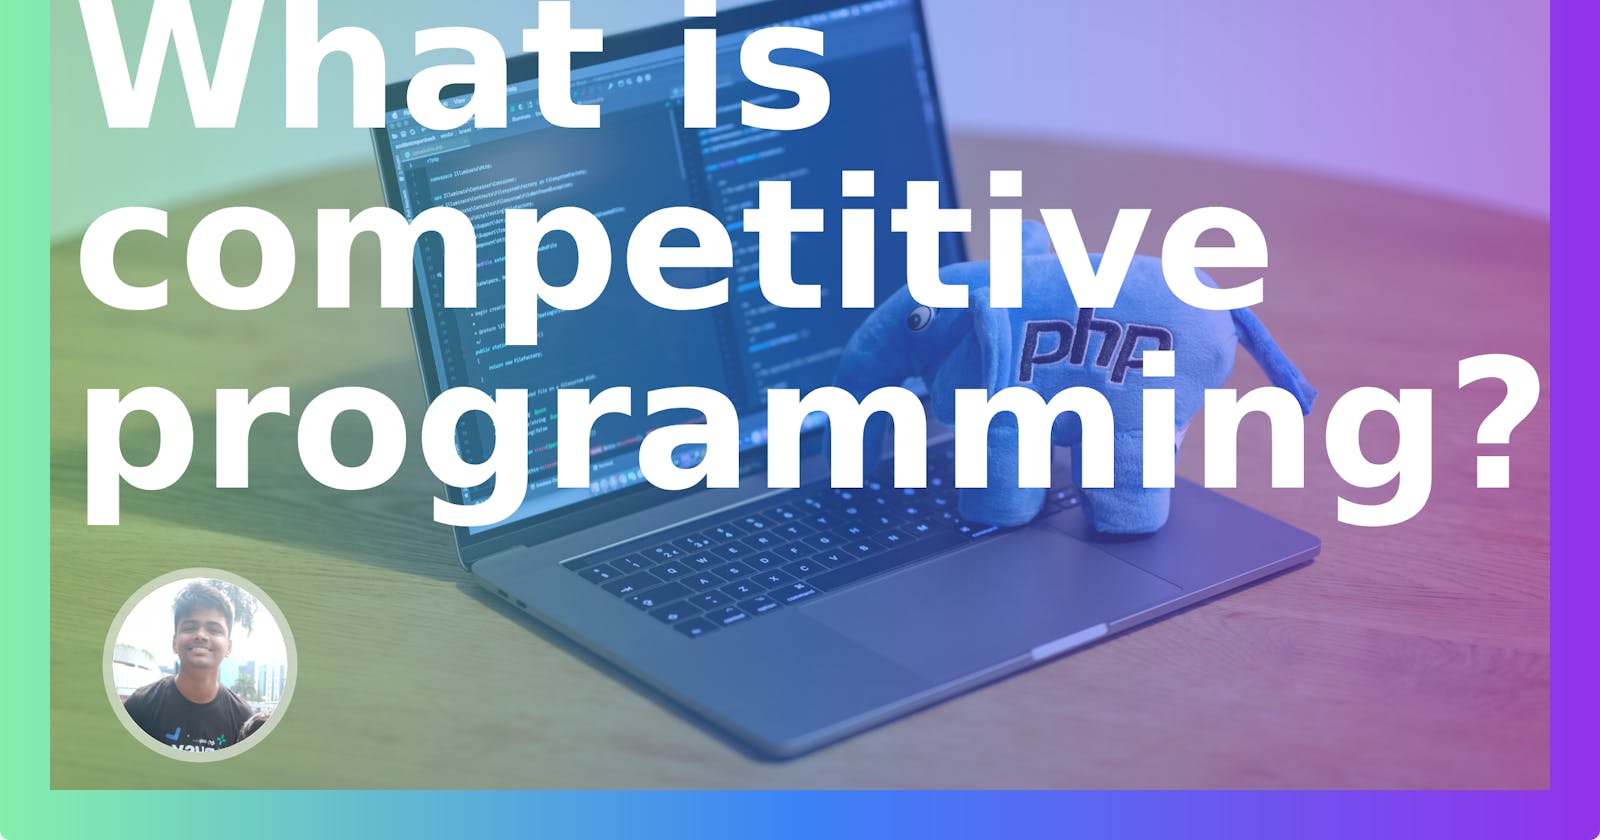 What is competitive programming?